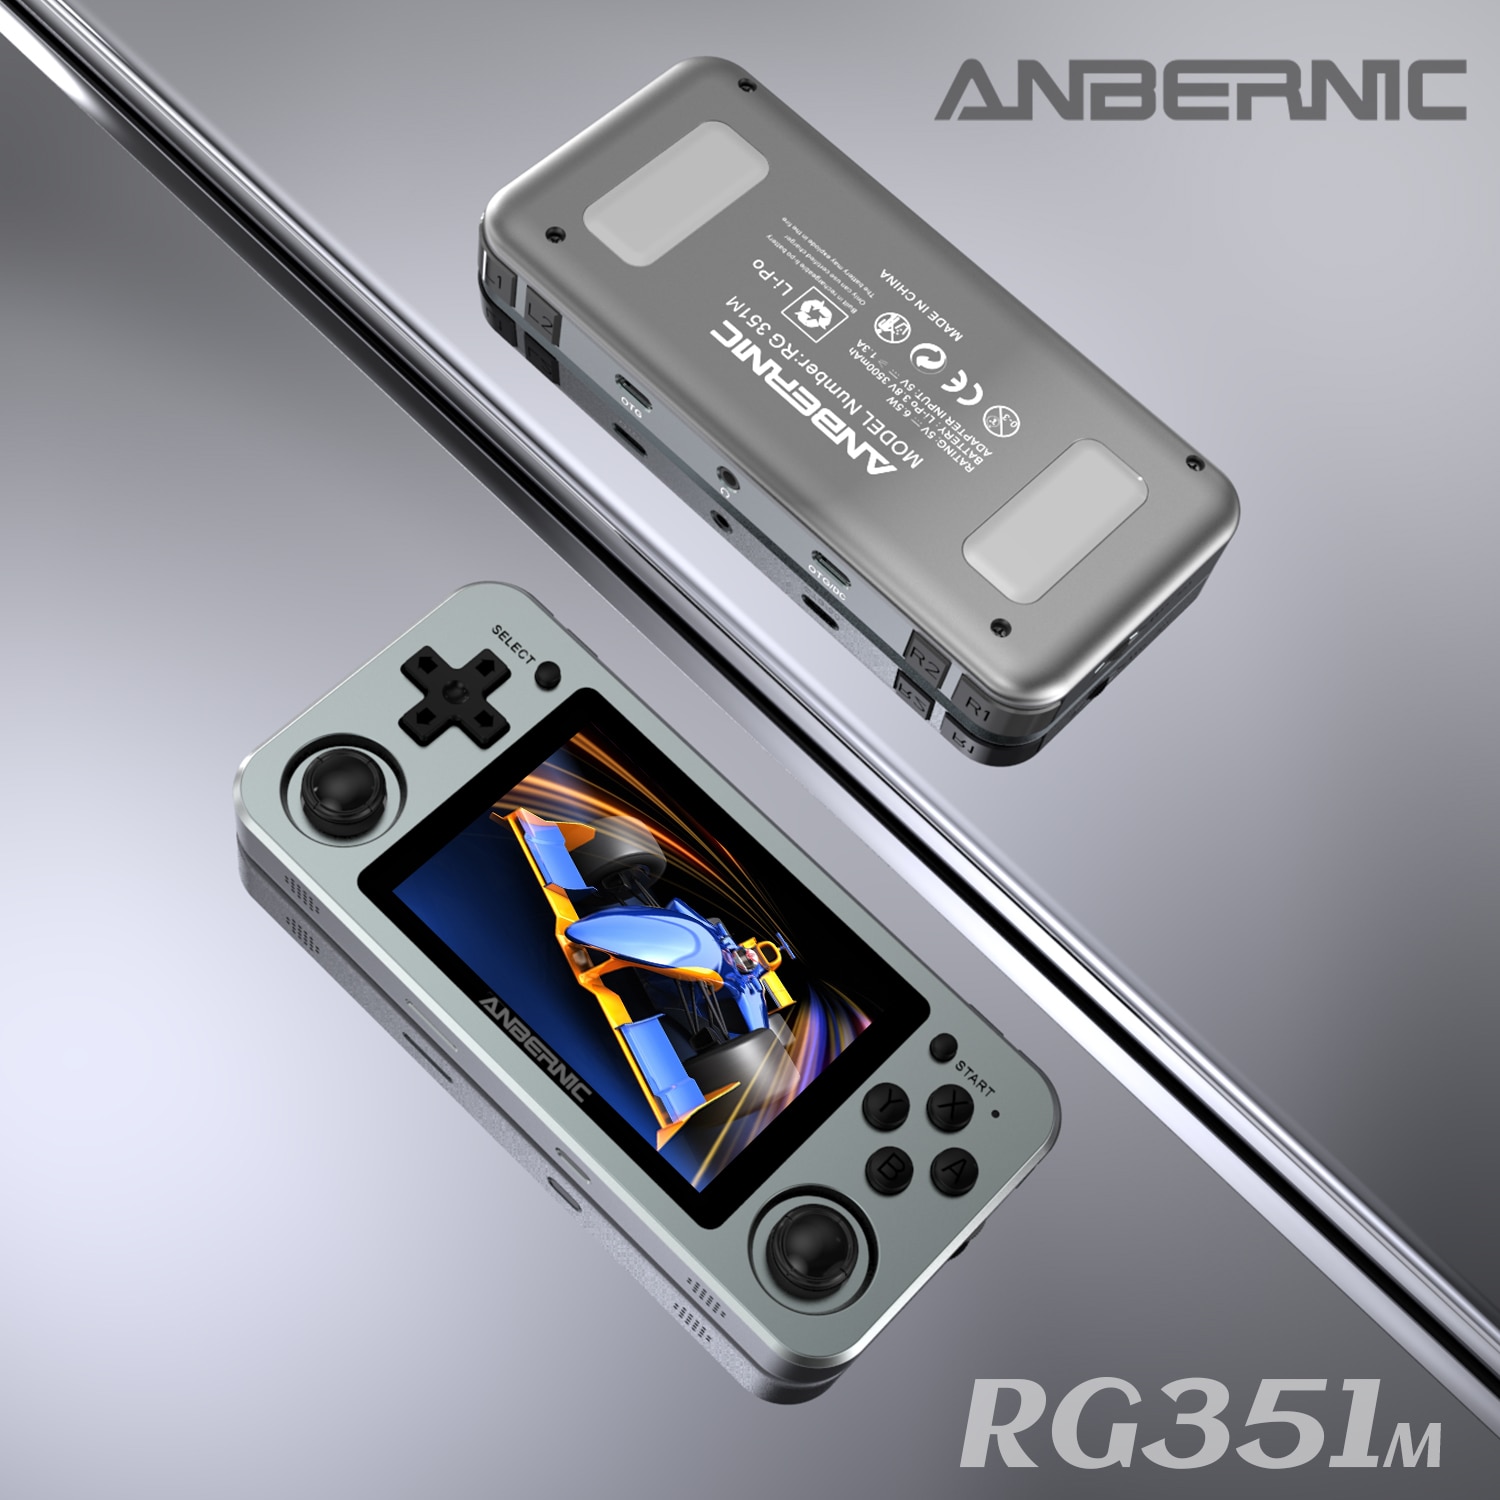 New RG351M ANBERNIC Retro Games Aluminum Alloy 64G 2400 GAMES handheld game console PS1 RK3326 Open Source 3.5 INCH RG351Emulato 2